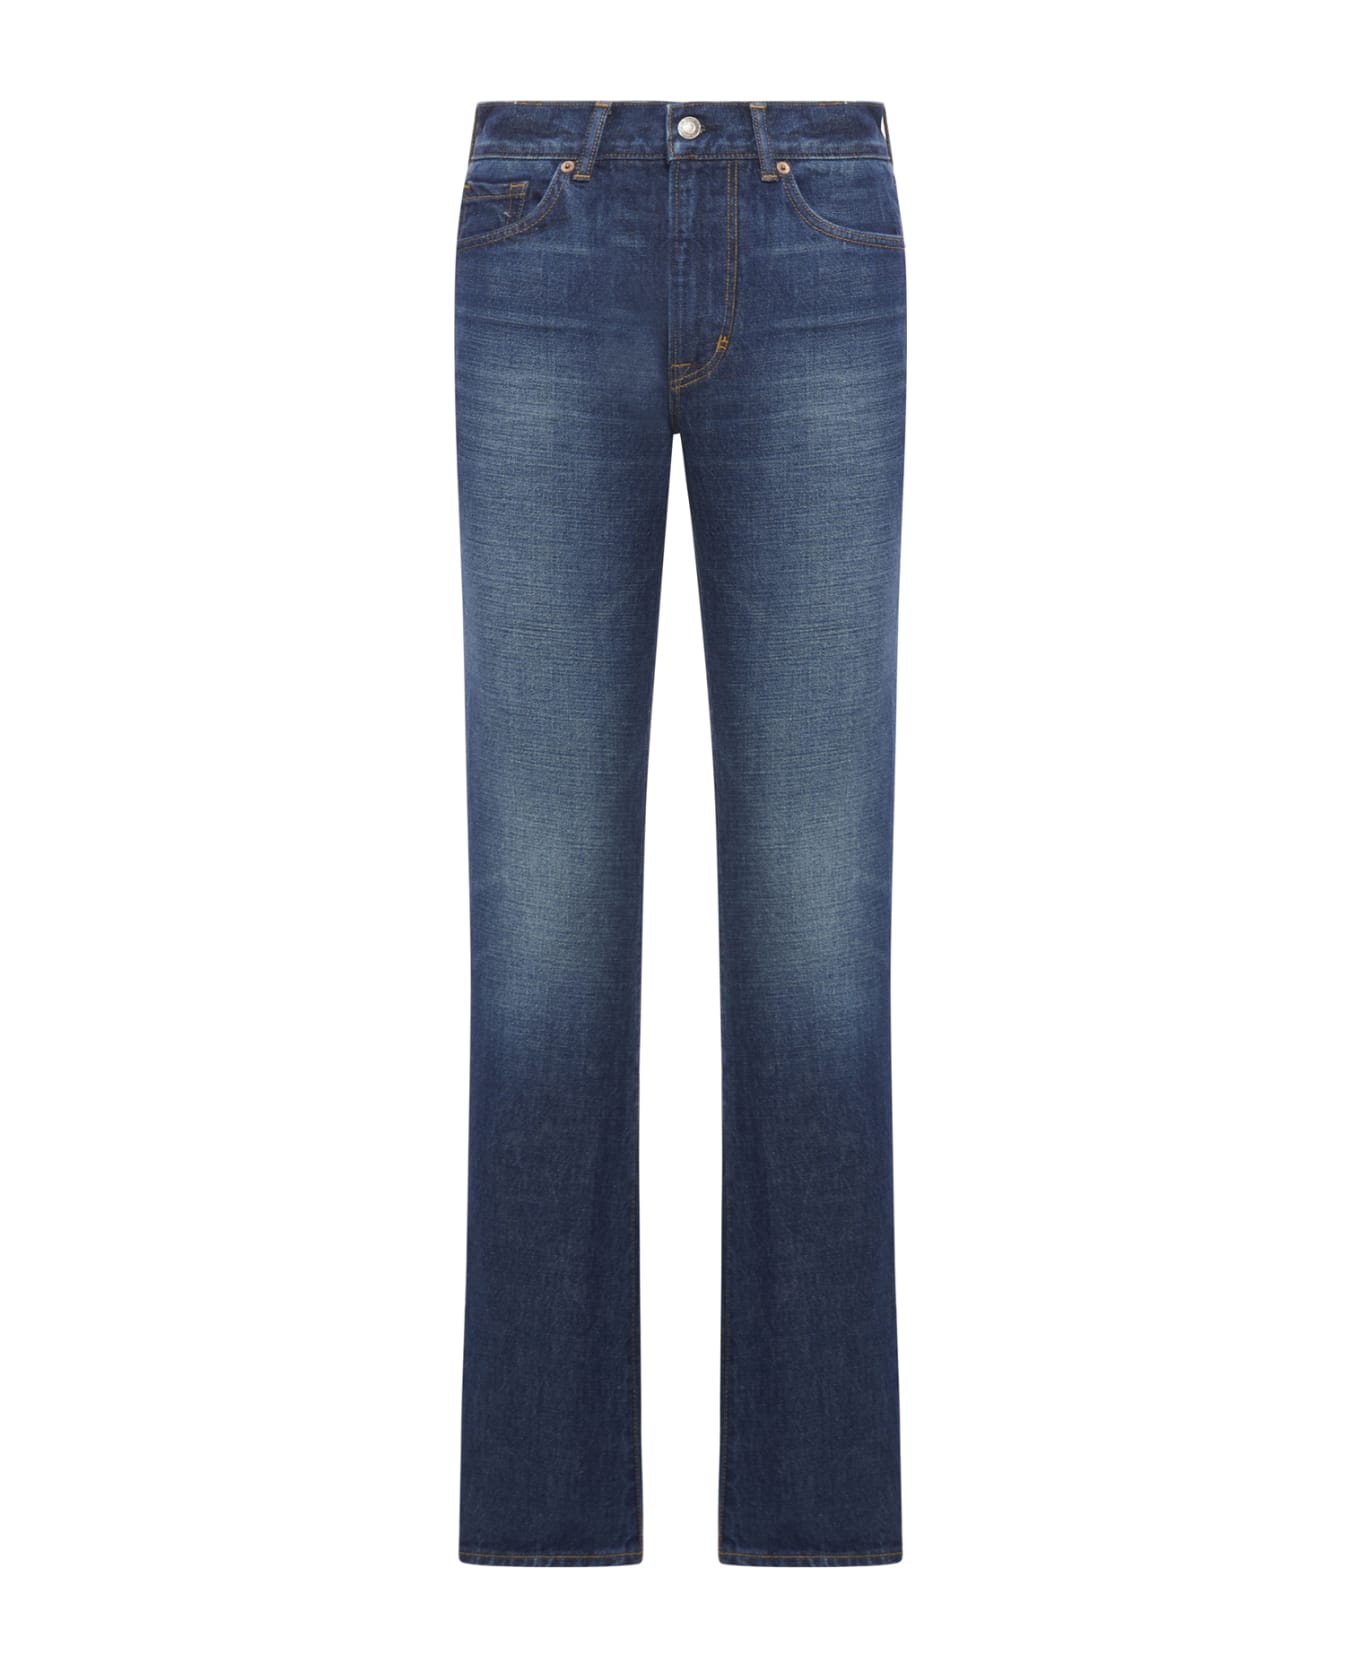 Tom Ford Stone Washed Denim Straight Pants - Mid Blue